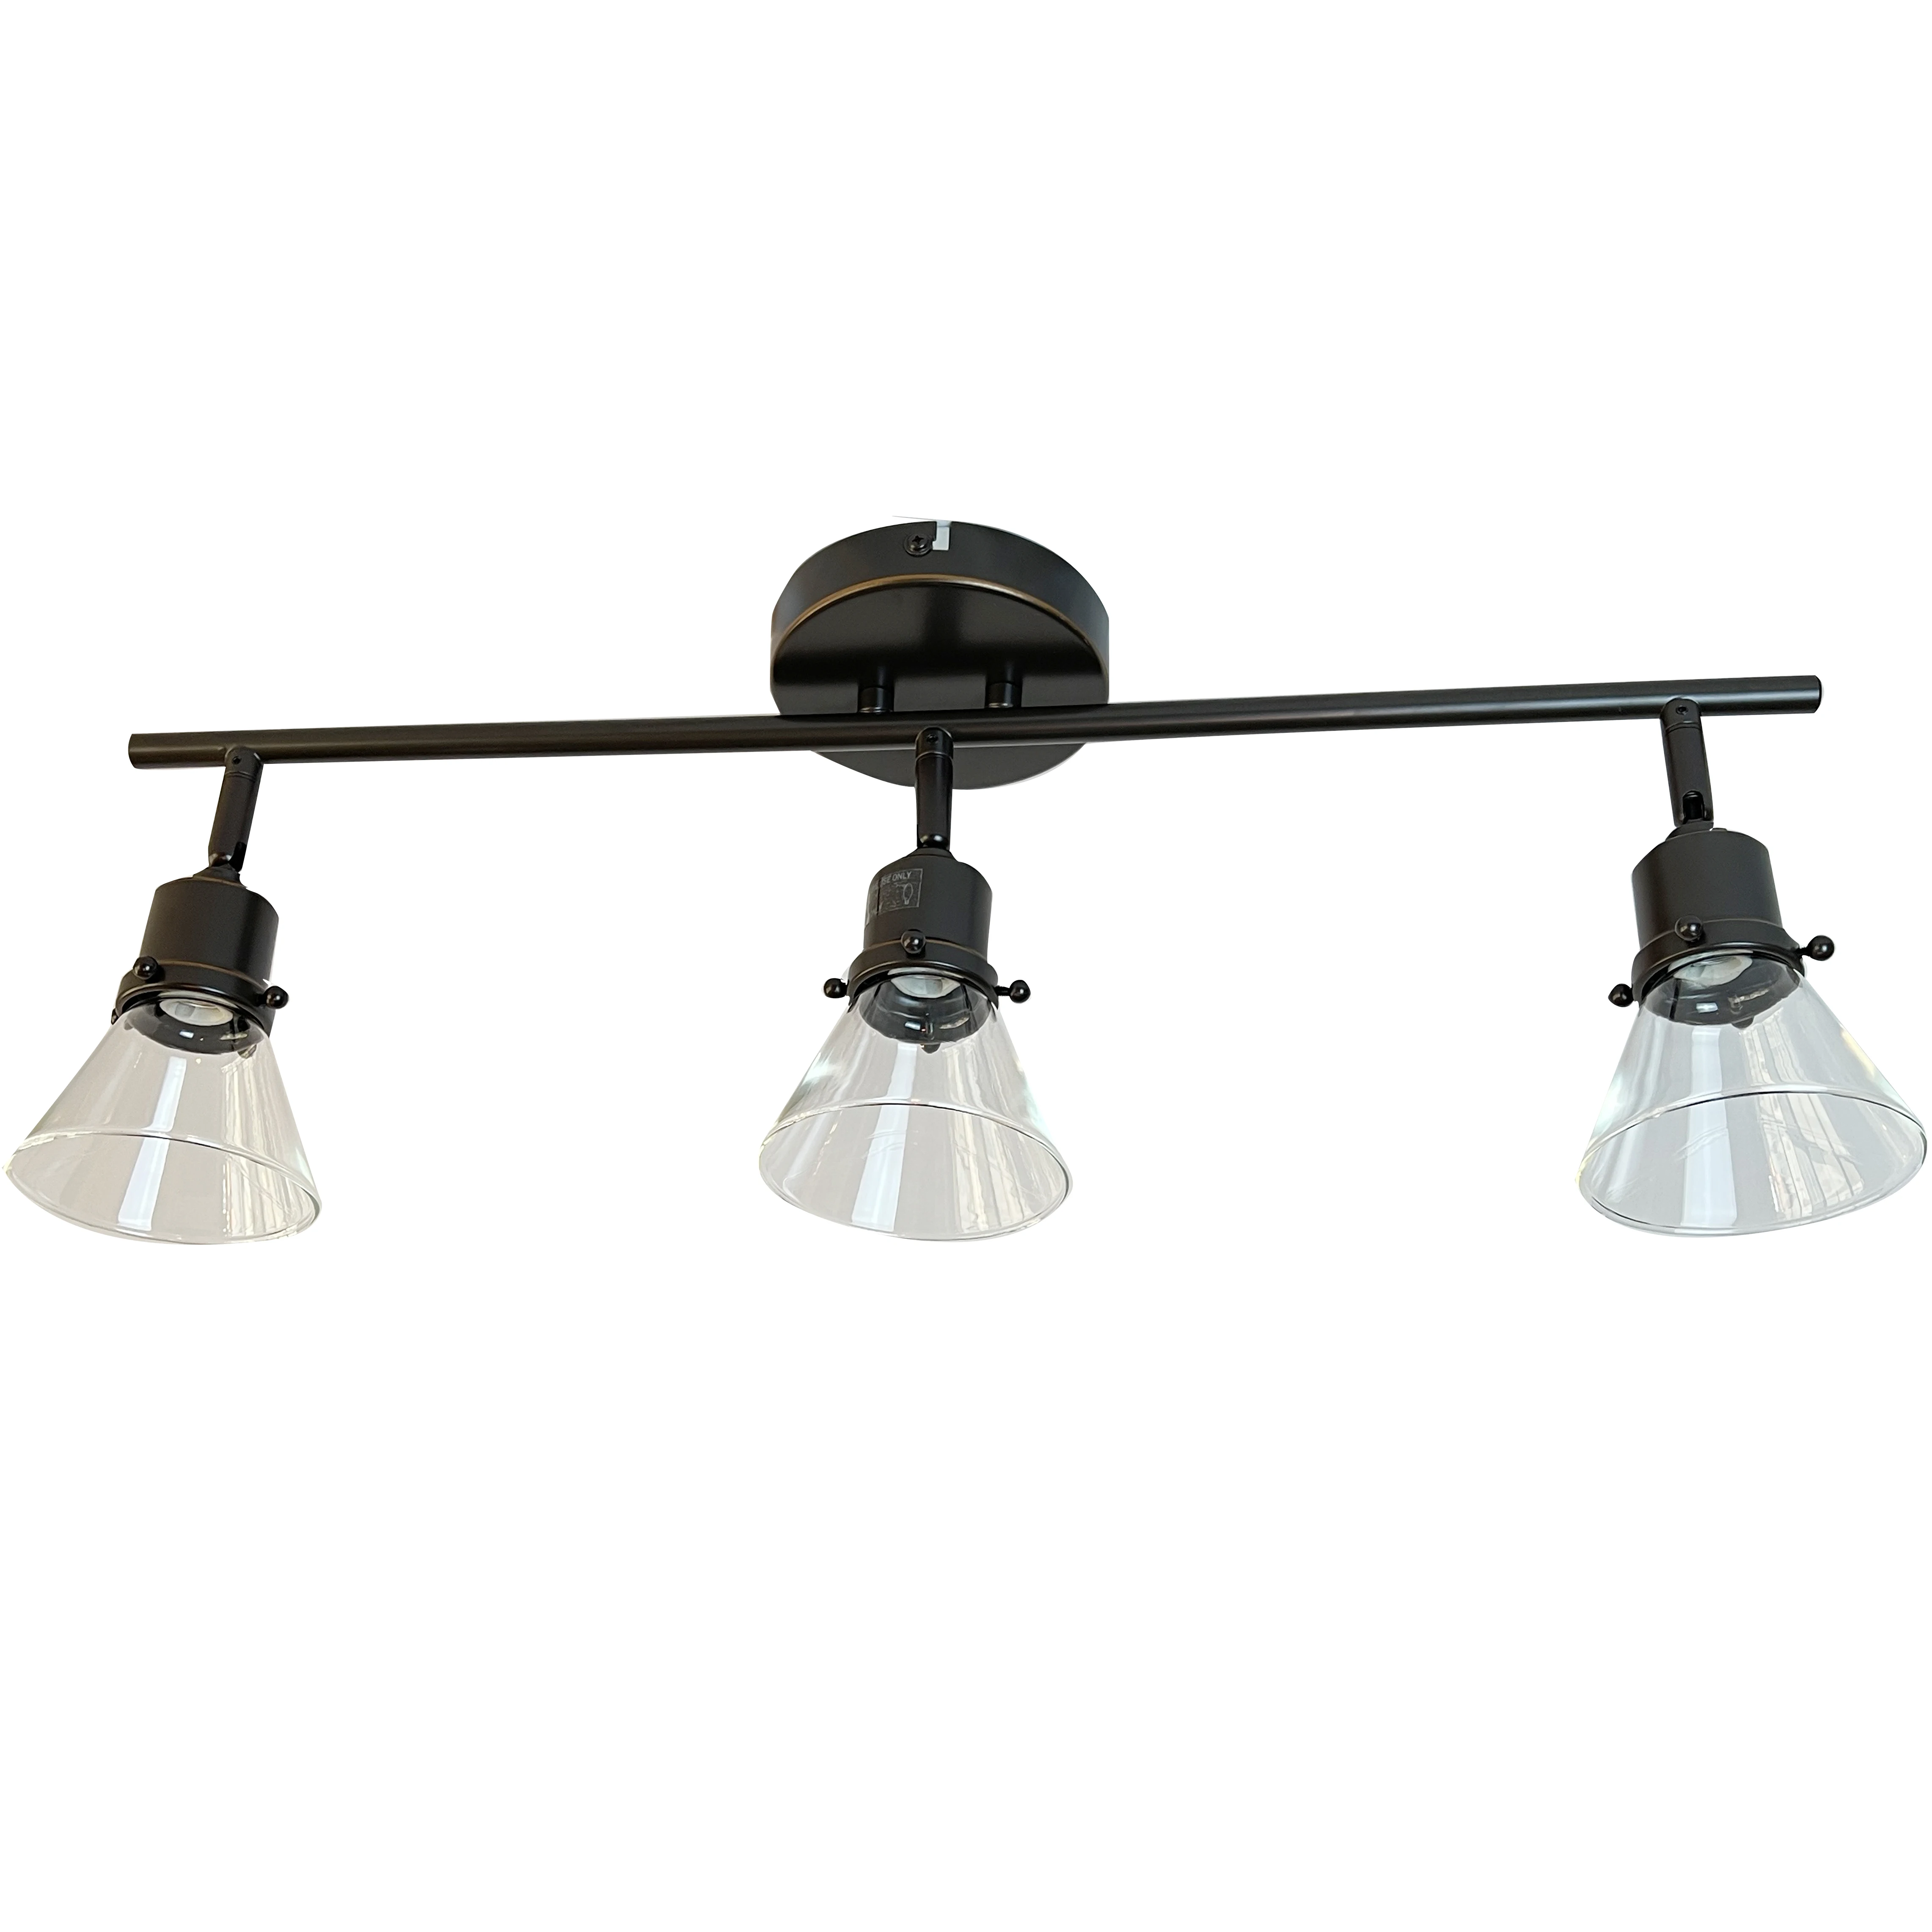 How Bright High Quality Modern Simple Decorative Fixed Track Light Fixing Head Adjustable